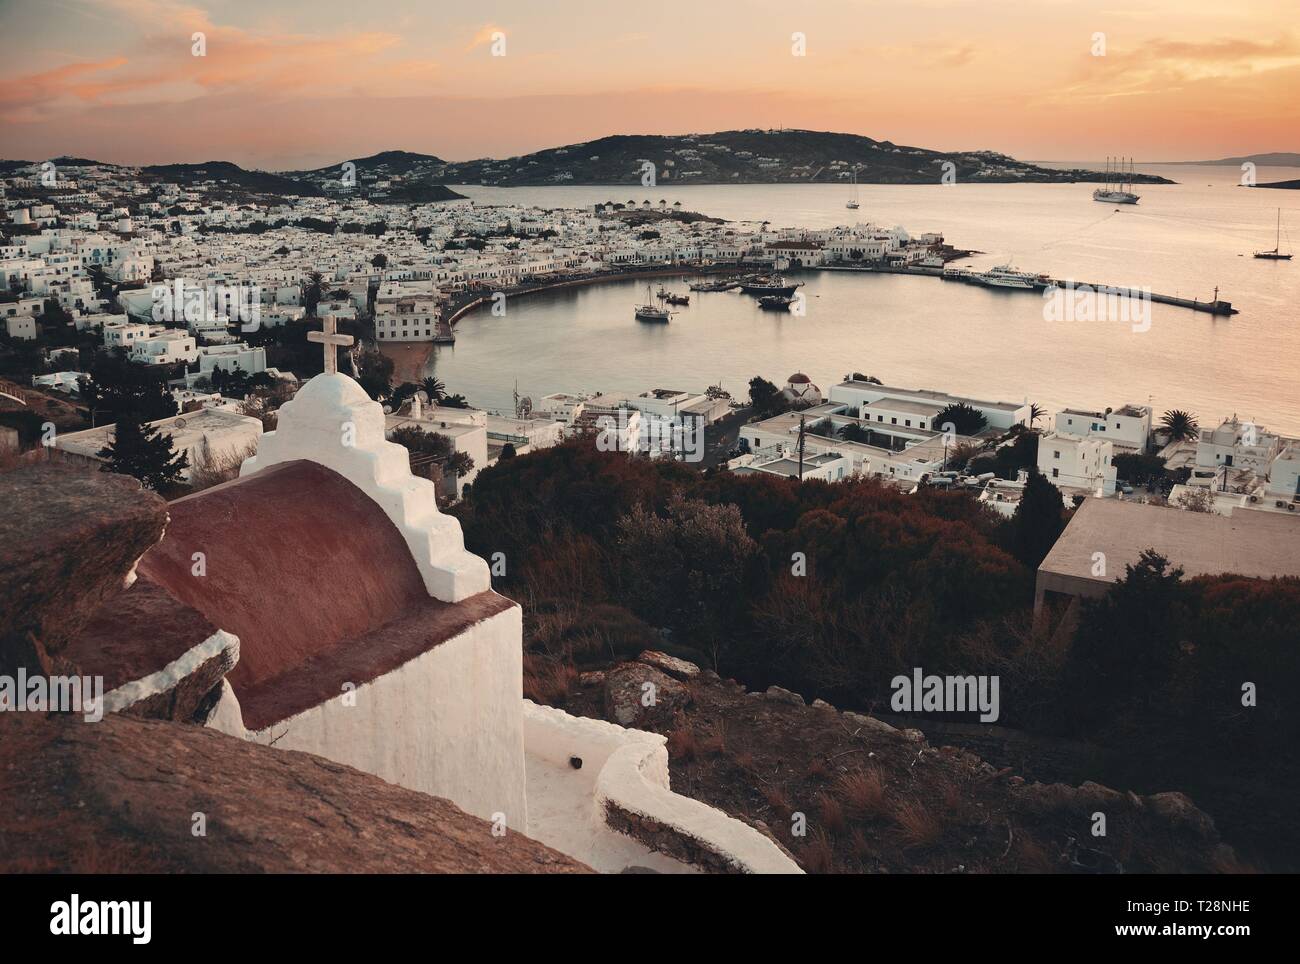 Mykonos bay viewed from above at sunset. Greece. Stock Photo